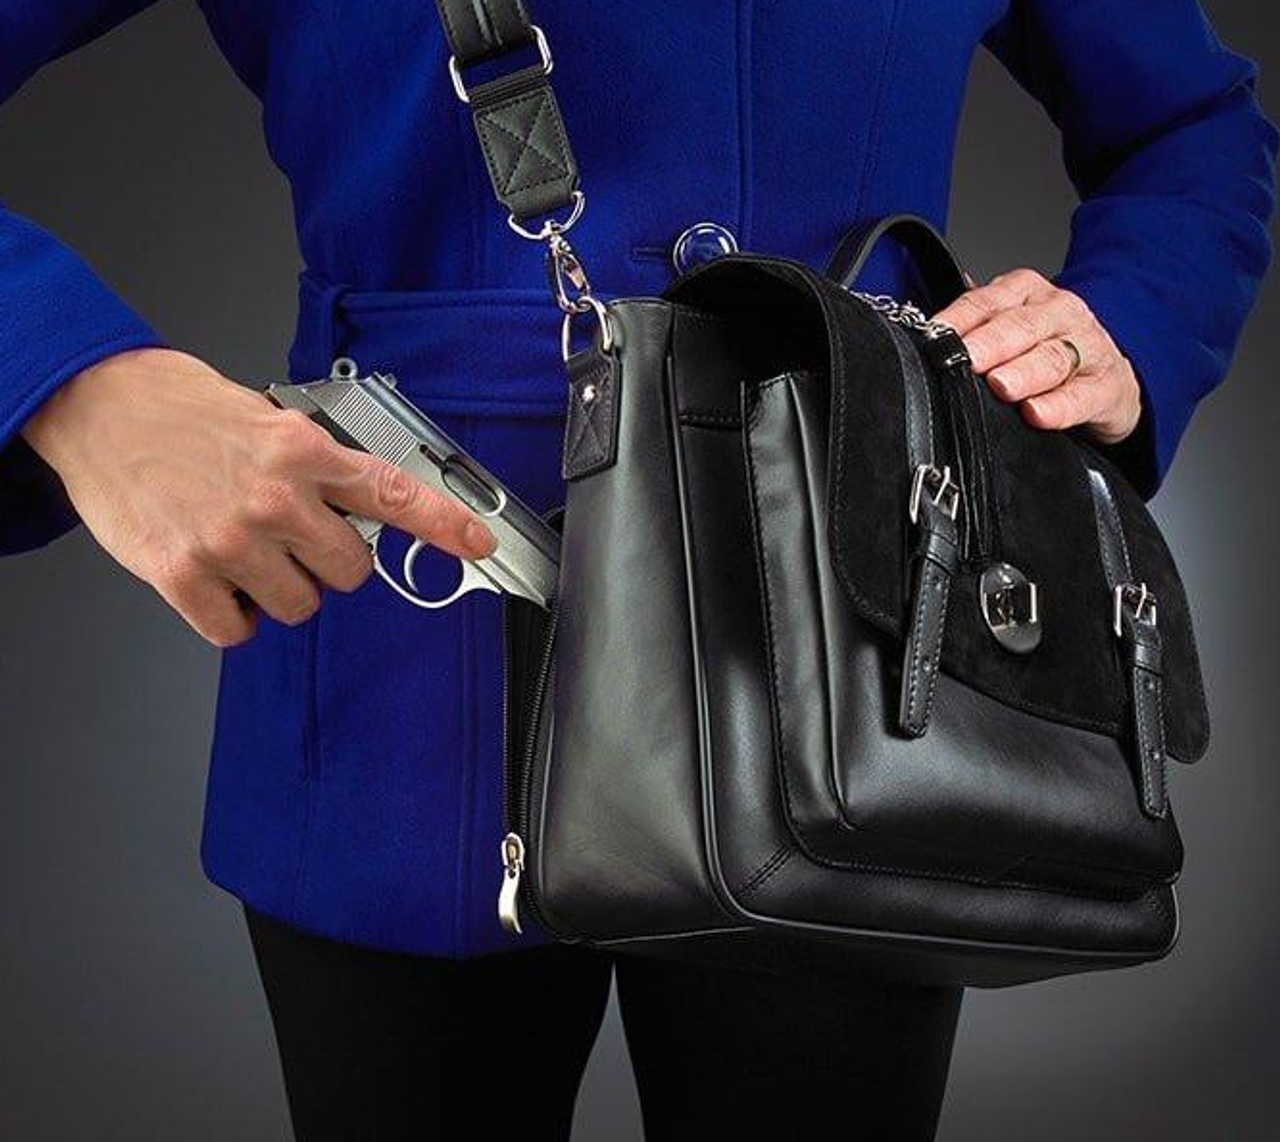 Gun Tote'n Mamas Blk Leather Concealed Carry CCW Bucket Tote Gun Purse GTM-19/BK  | eBay